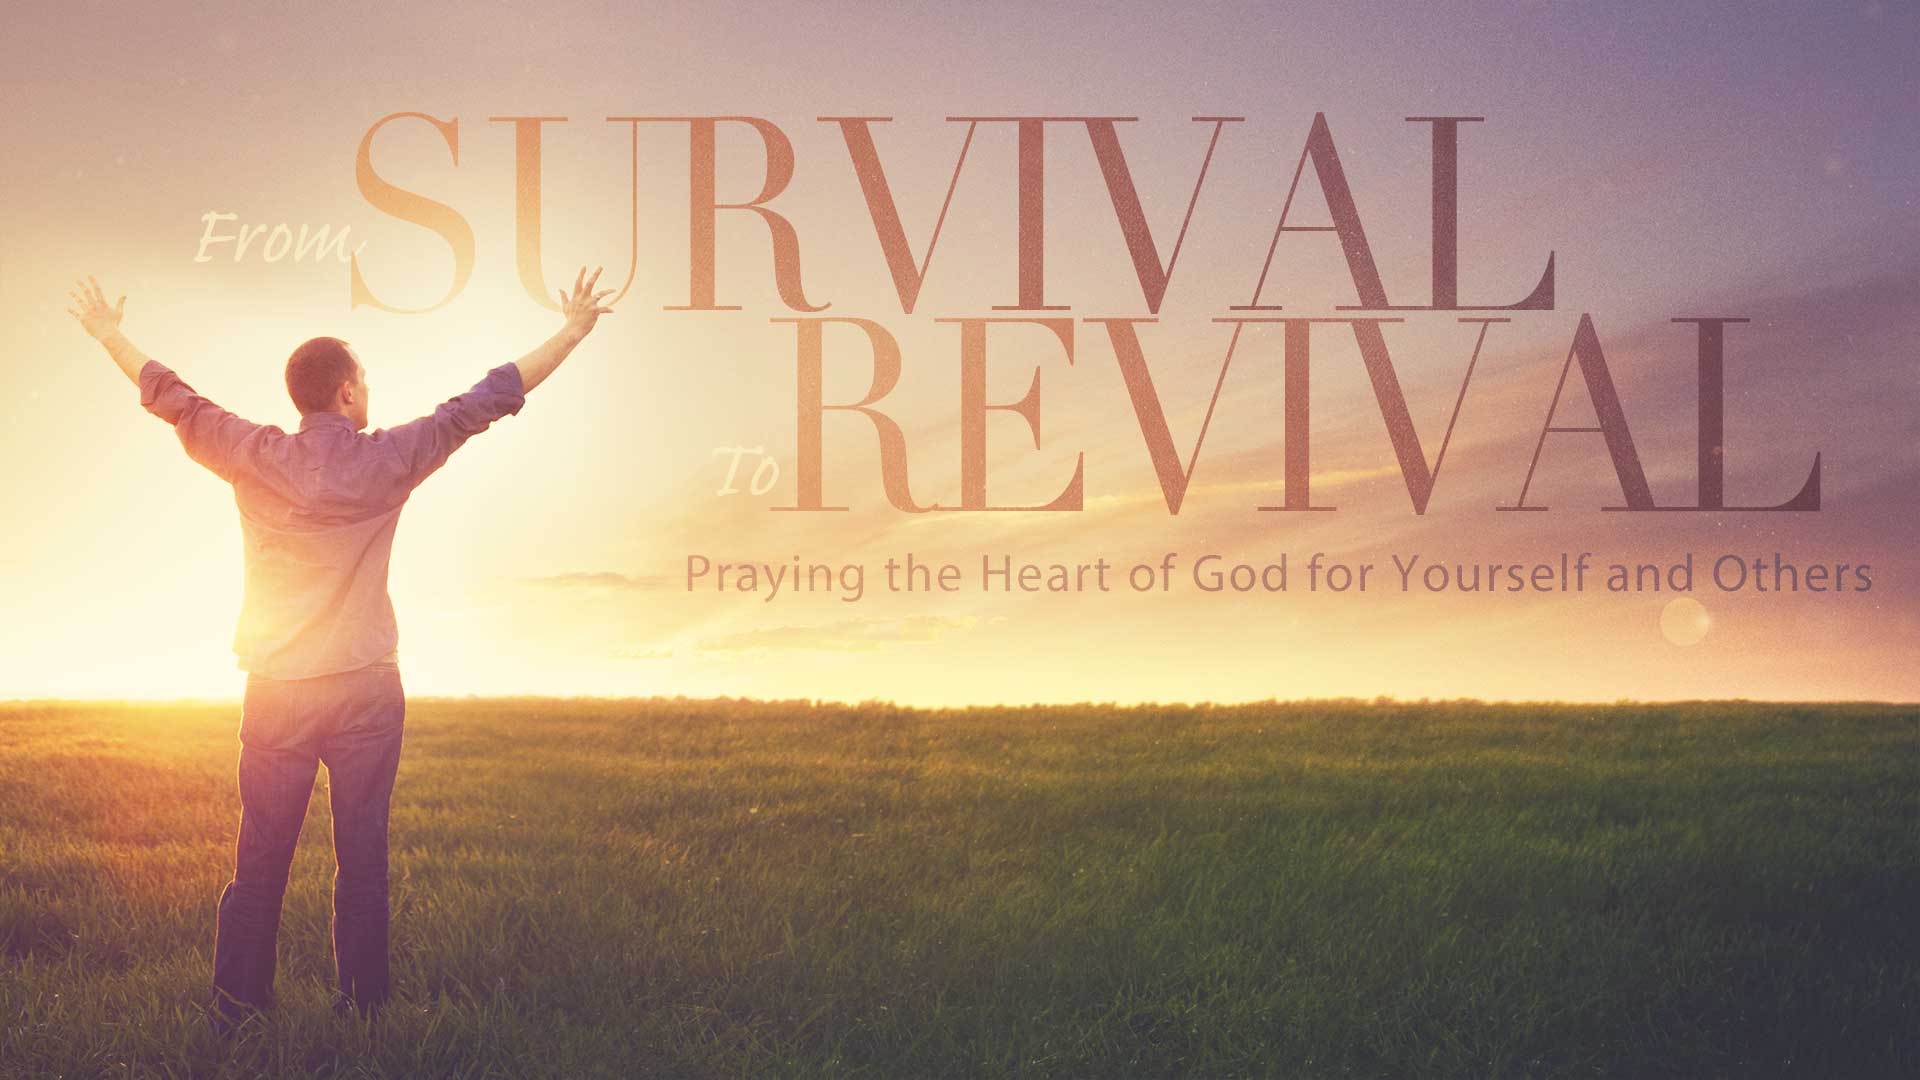 From Survival to Revival: Week 11 Image